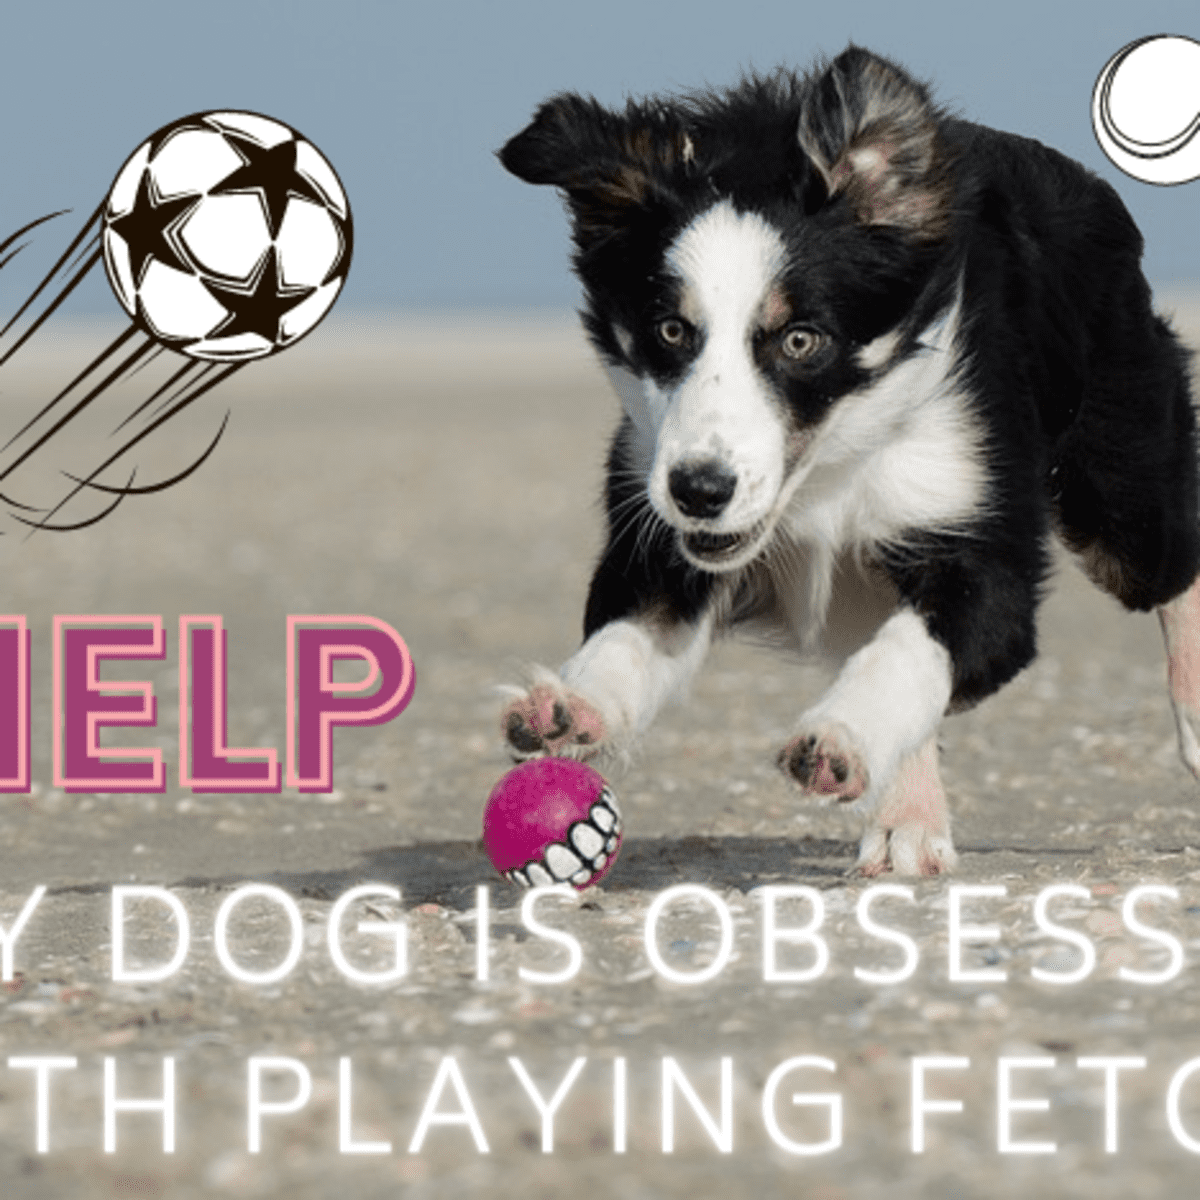 when can a puppy learn to fetch